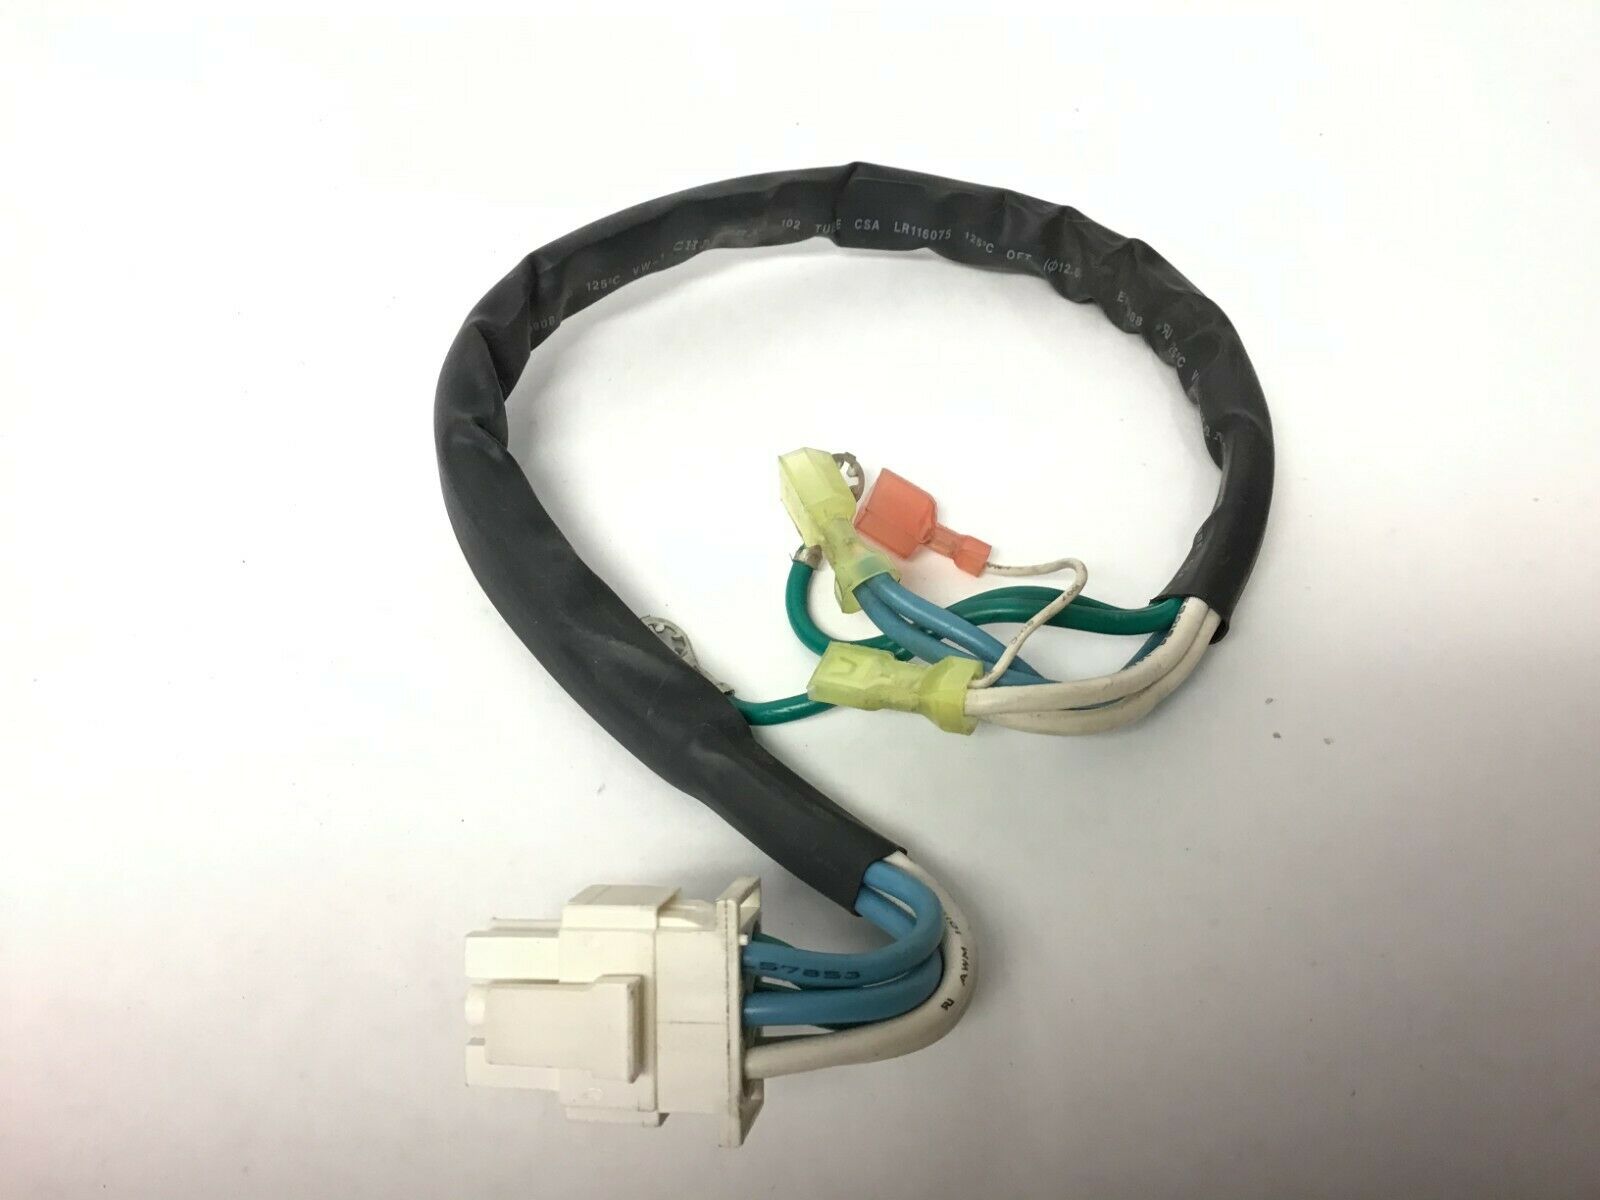 NordicTrack 6000 CS CTK62520 Treadmill Wire Harness Cable (Used)